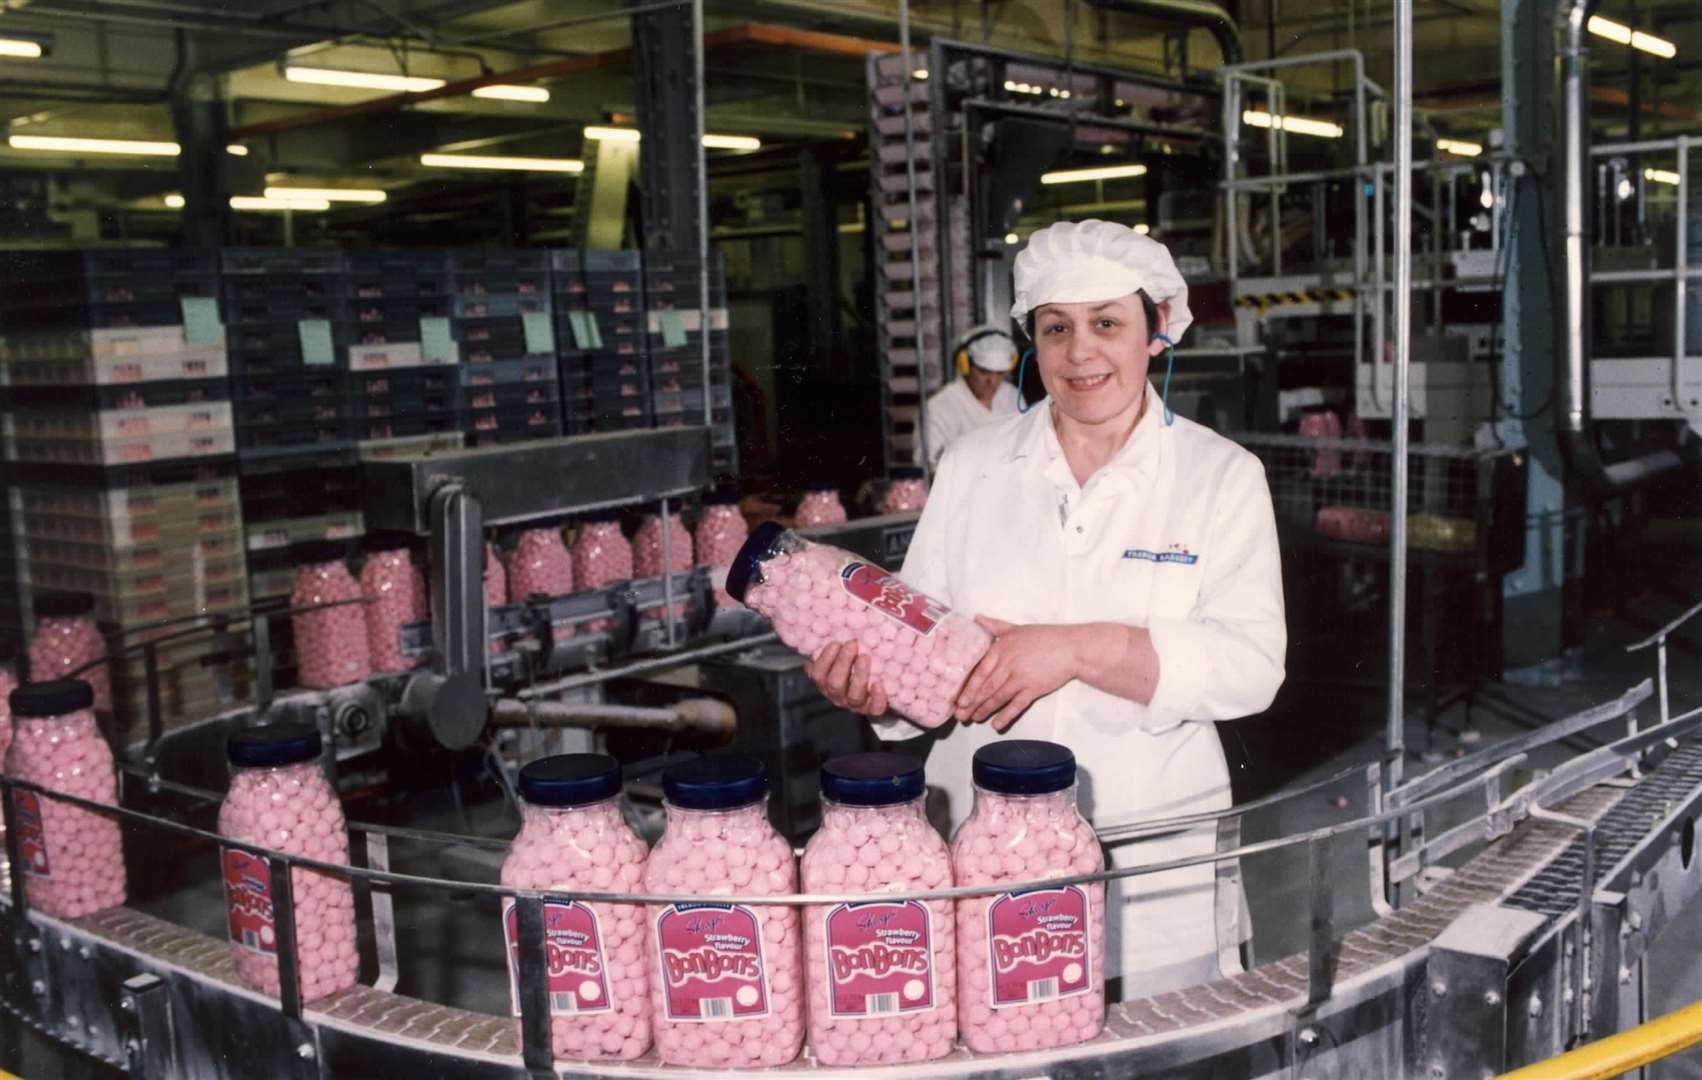 Inside the Trebor sweets factory in St Peter's Street, Maidstone, in 1996. It shut four years later and was demolished to make way for housing